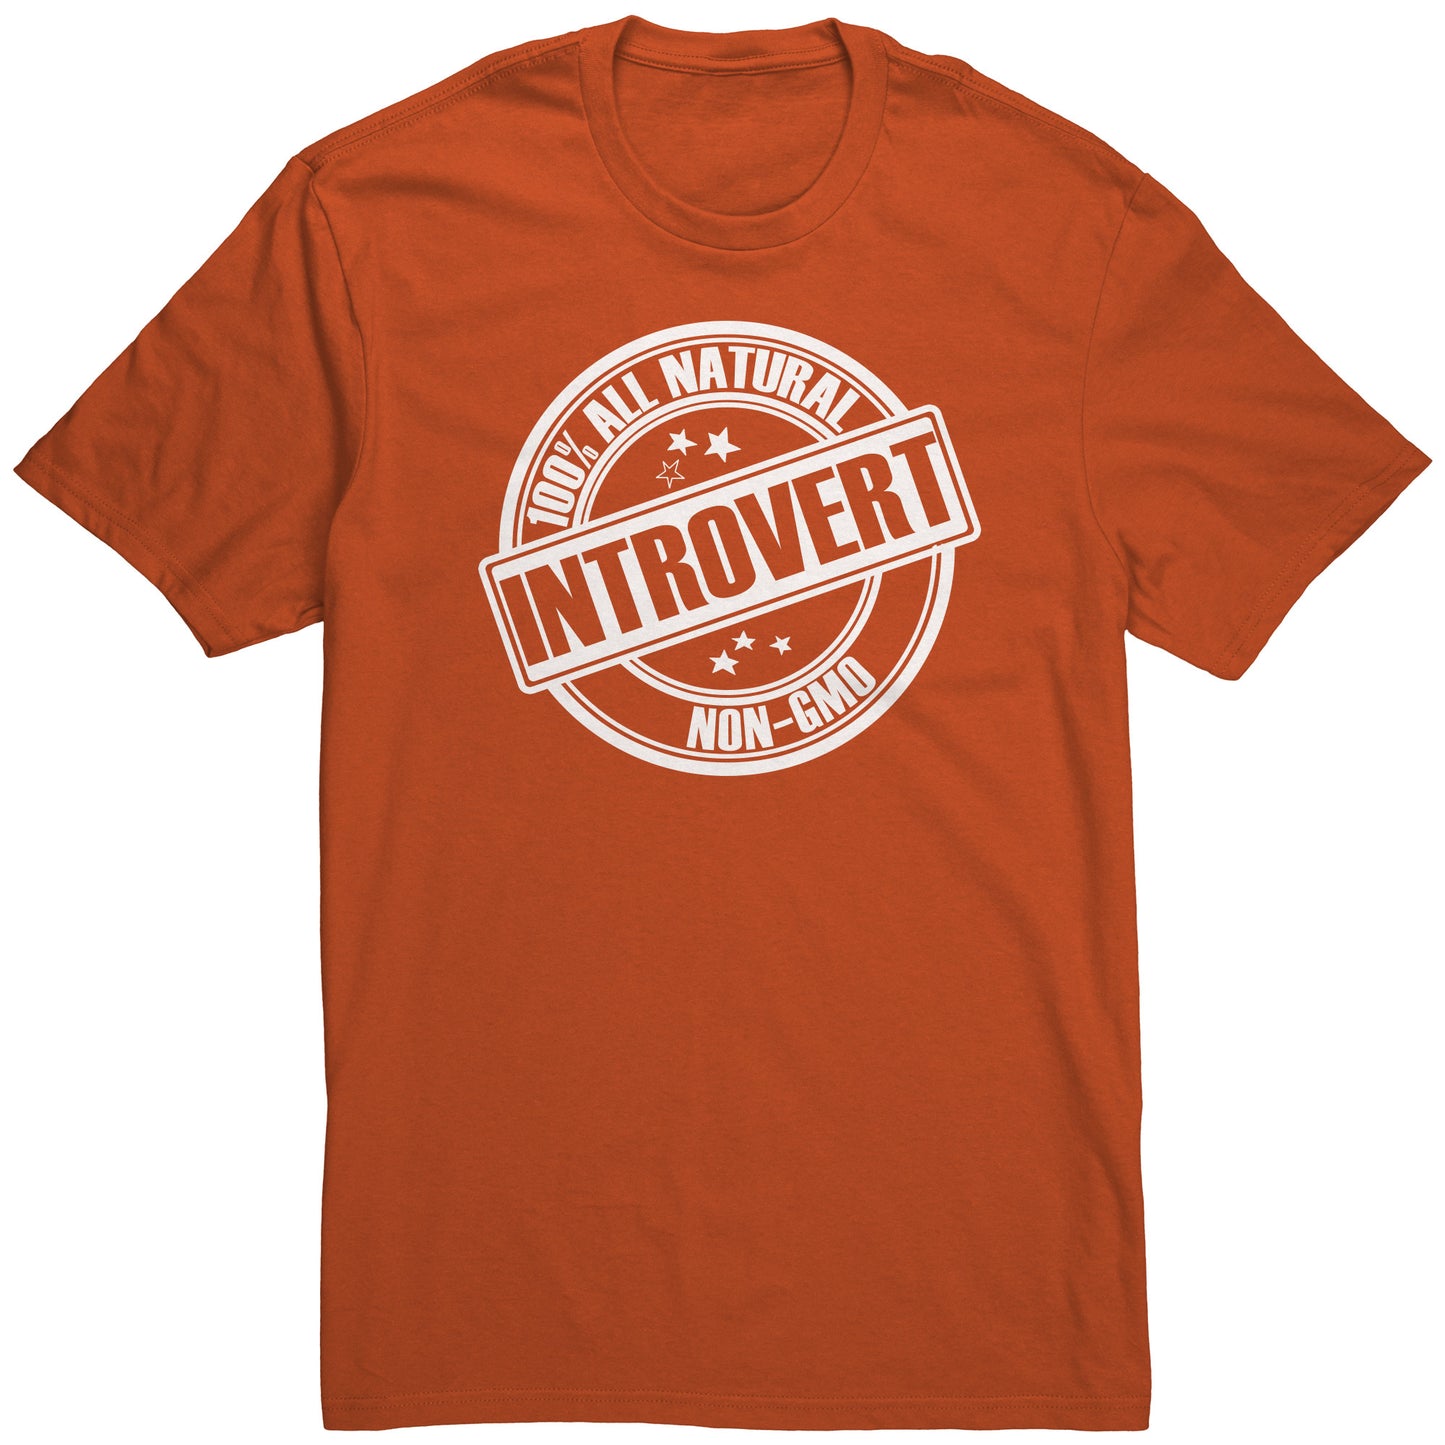 Adult Tee "100% All Natural Introvert" (white print)